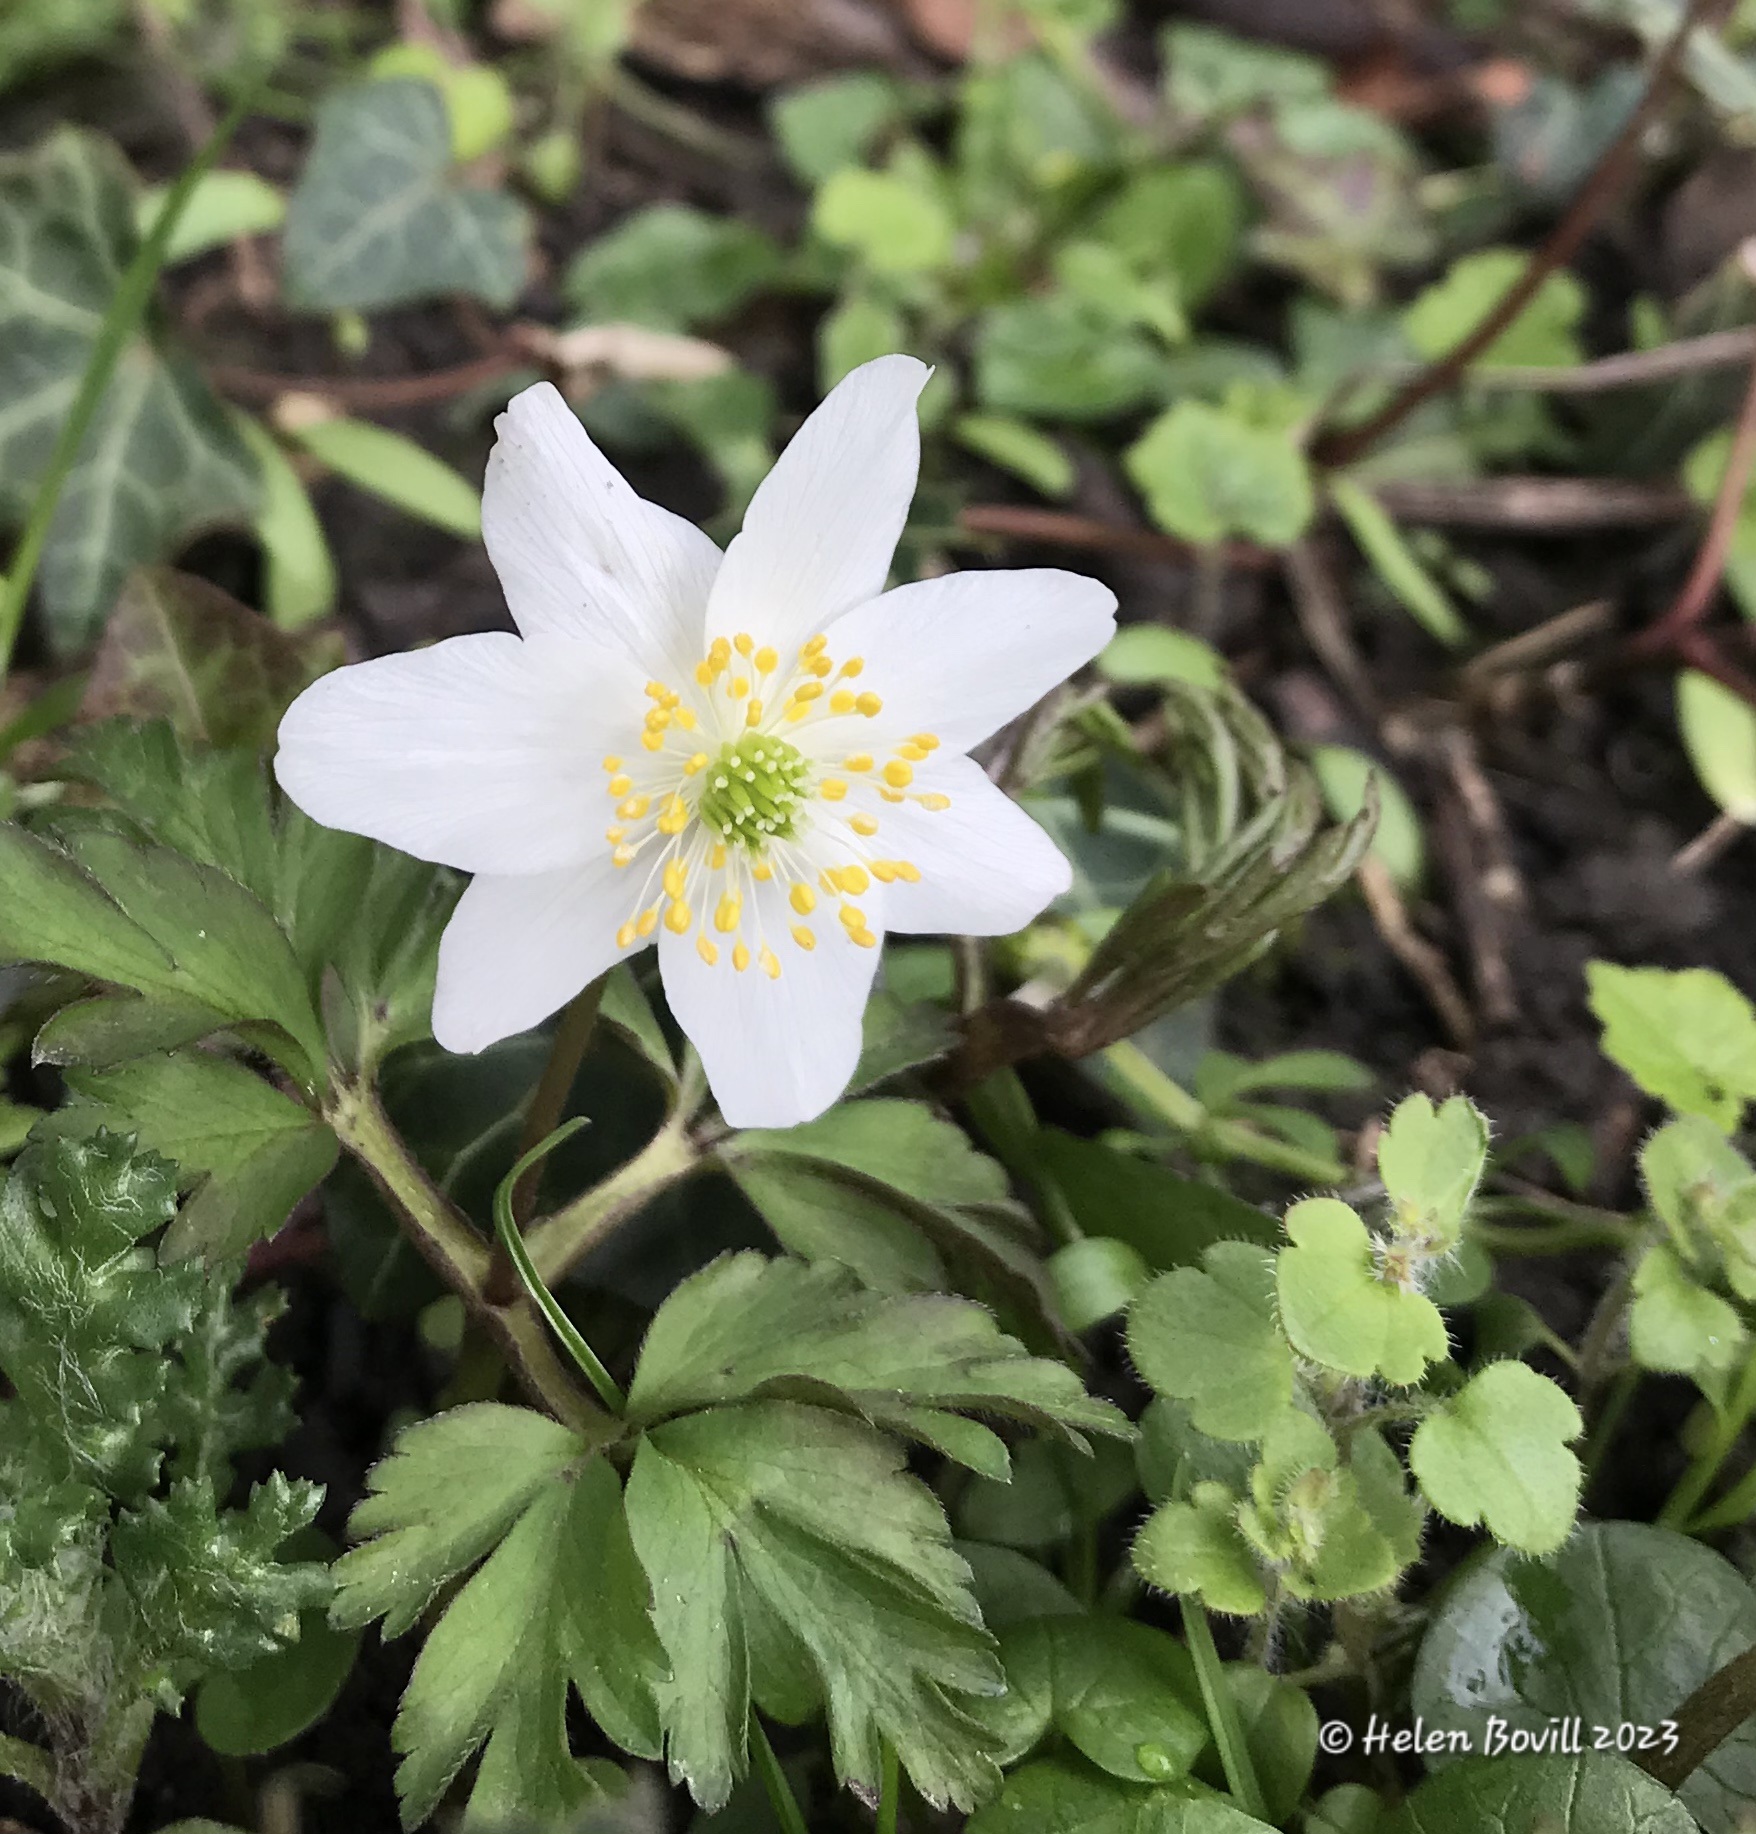 Wood Anemone growing in the grass verge near the cemetery